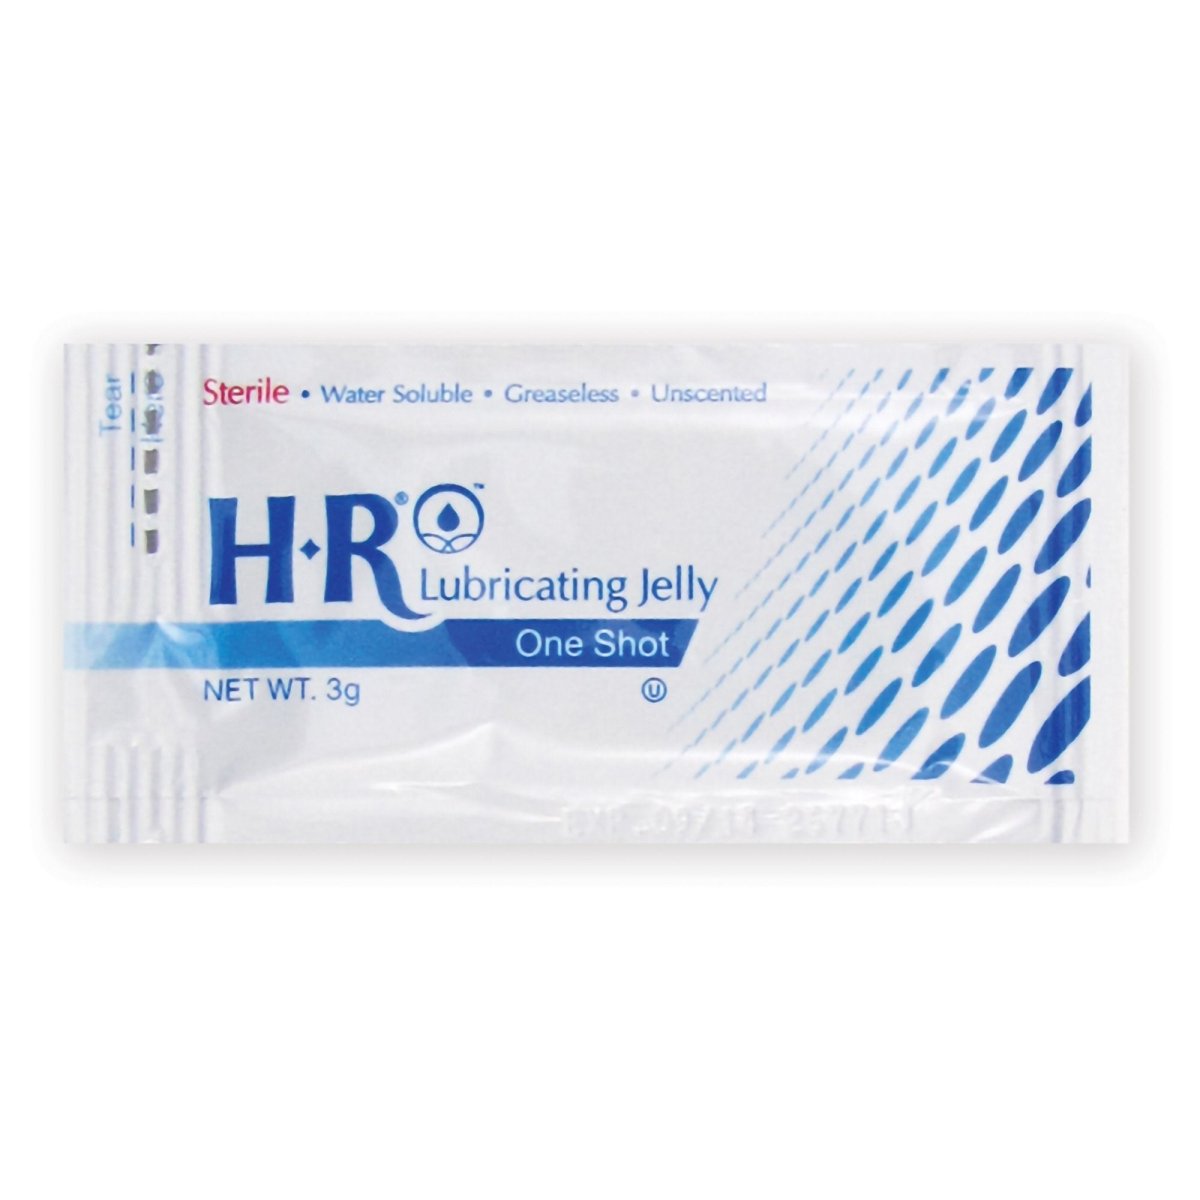 HR One Shot Lubricating Jelly - 869212_BX - 2